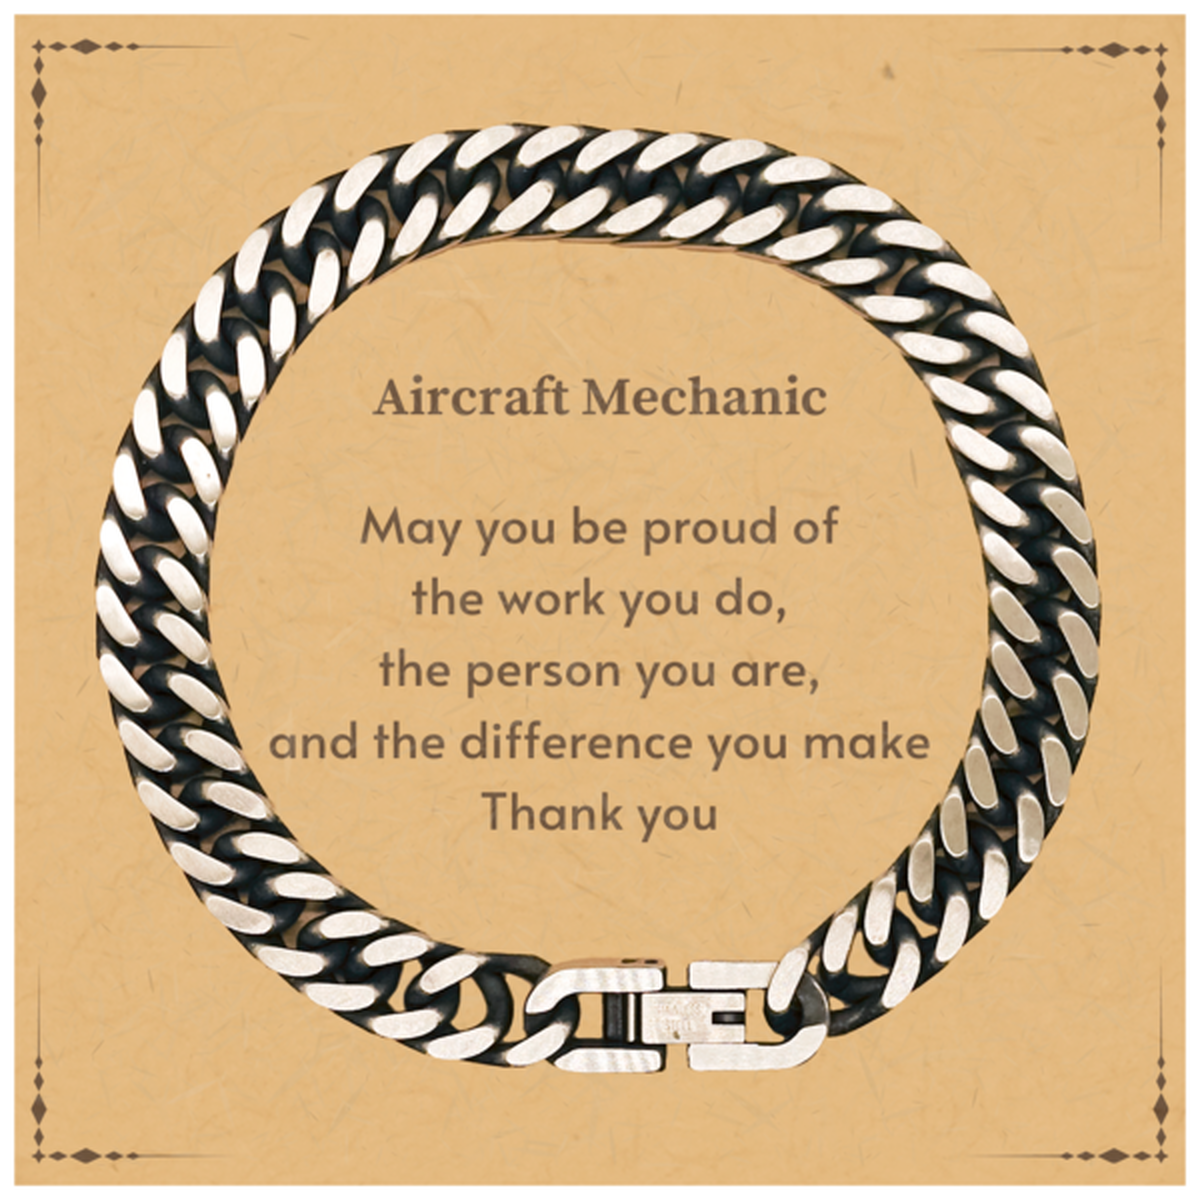 Heartwarming Cuban Link Chain Bracelet Retirement Coworkers Gifts for Aircraft Mechanic, Aircraft Mechanic May You be proud of the work you do, the person you are Gifts for Boss Men Women Friends